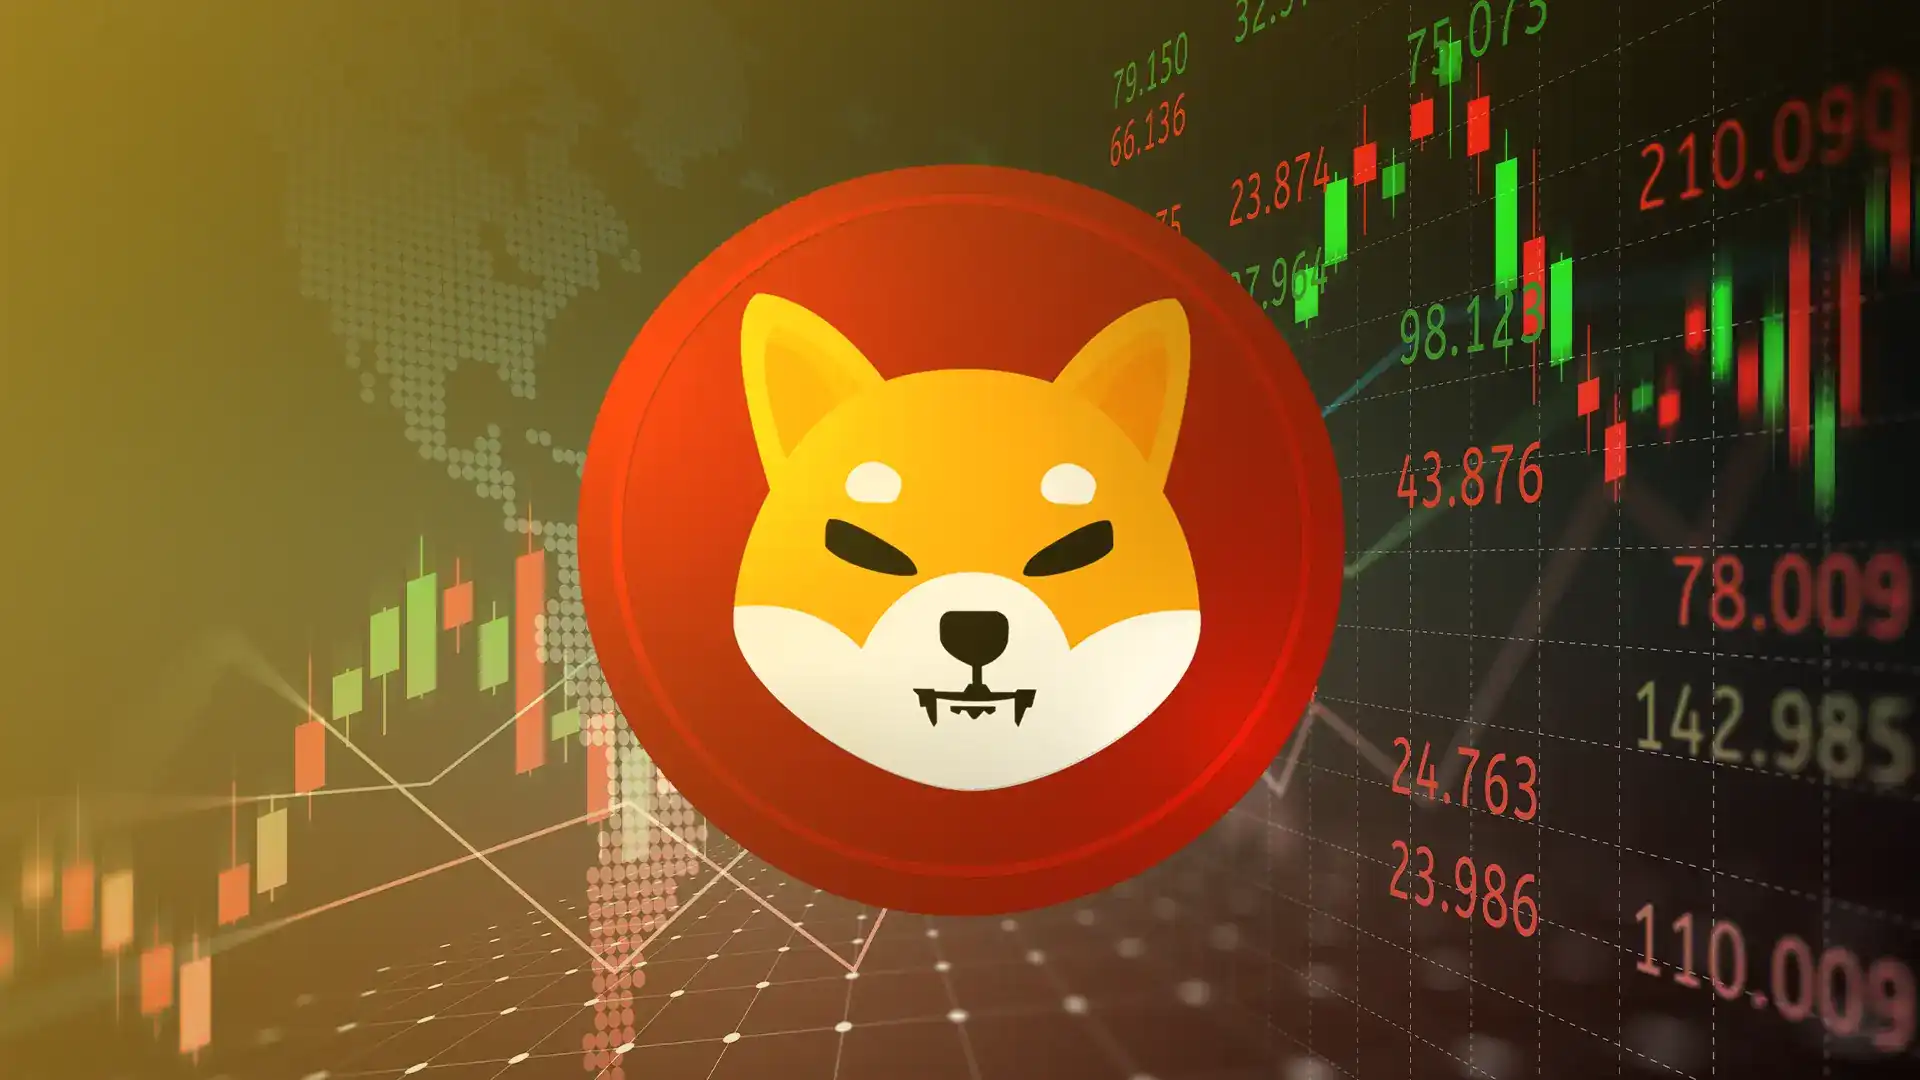 Shiba Inu Burn Rate Surges Over 30000% Today, Igniting Optimism in Crypto Market